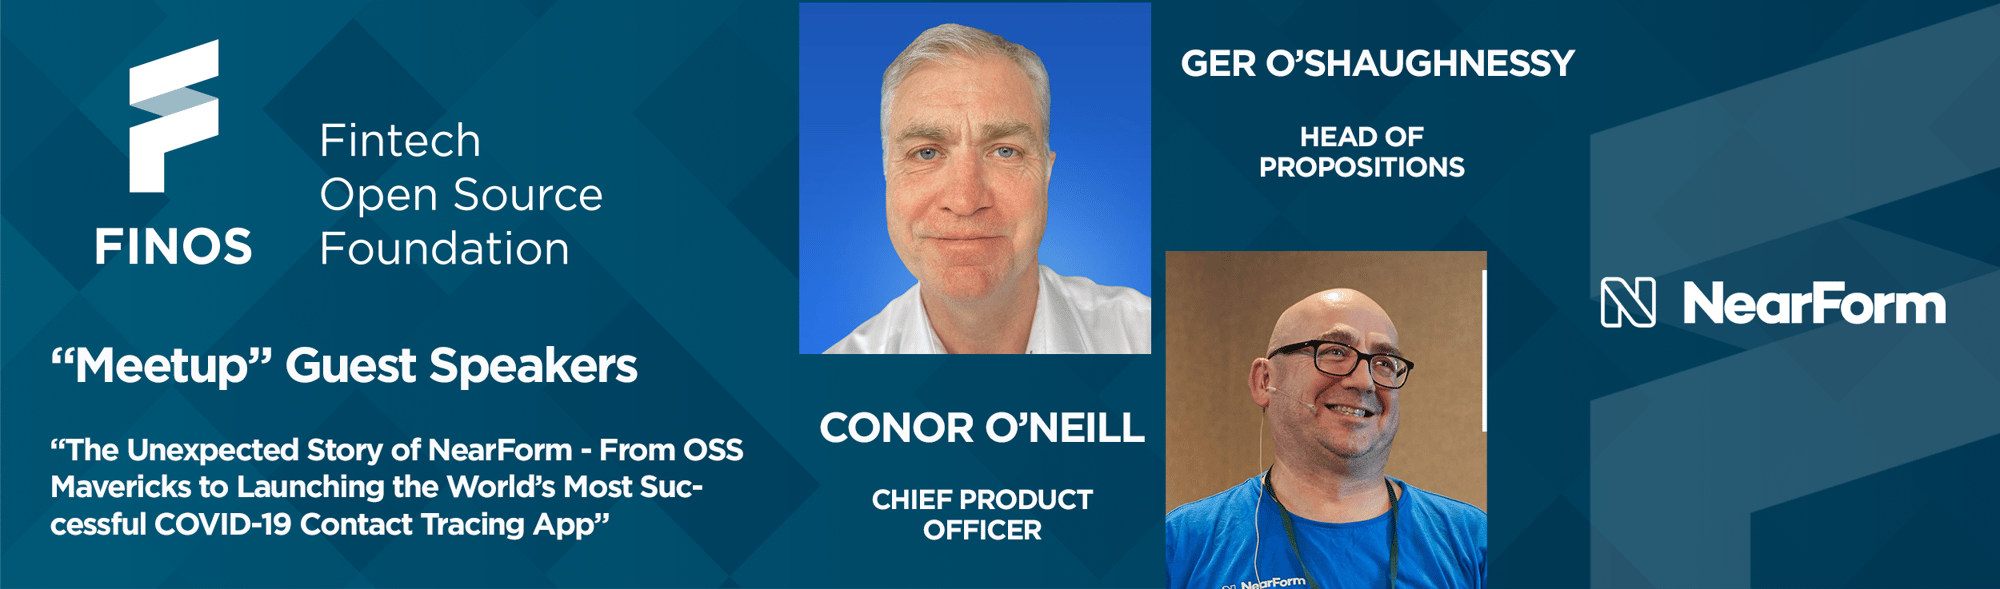 FINOS-meetup-guest-speakers-ger-oshaughnessy-conor-oneill-email-banner-1